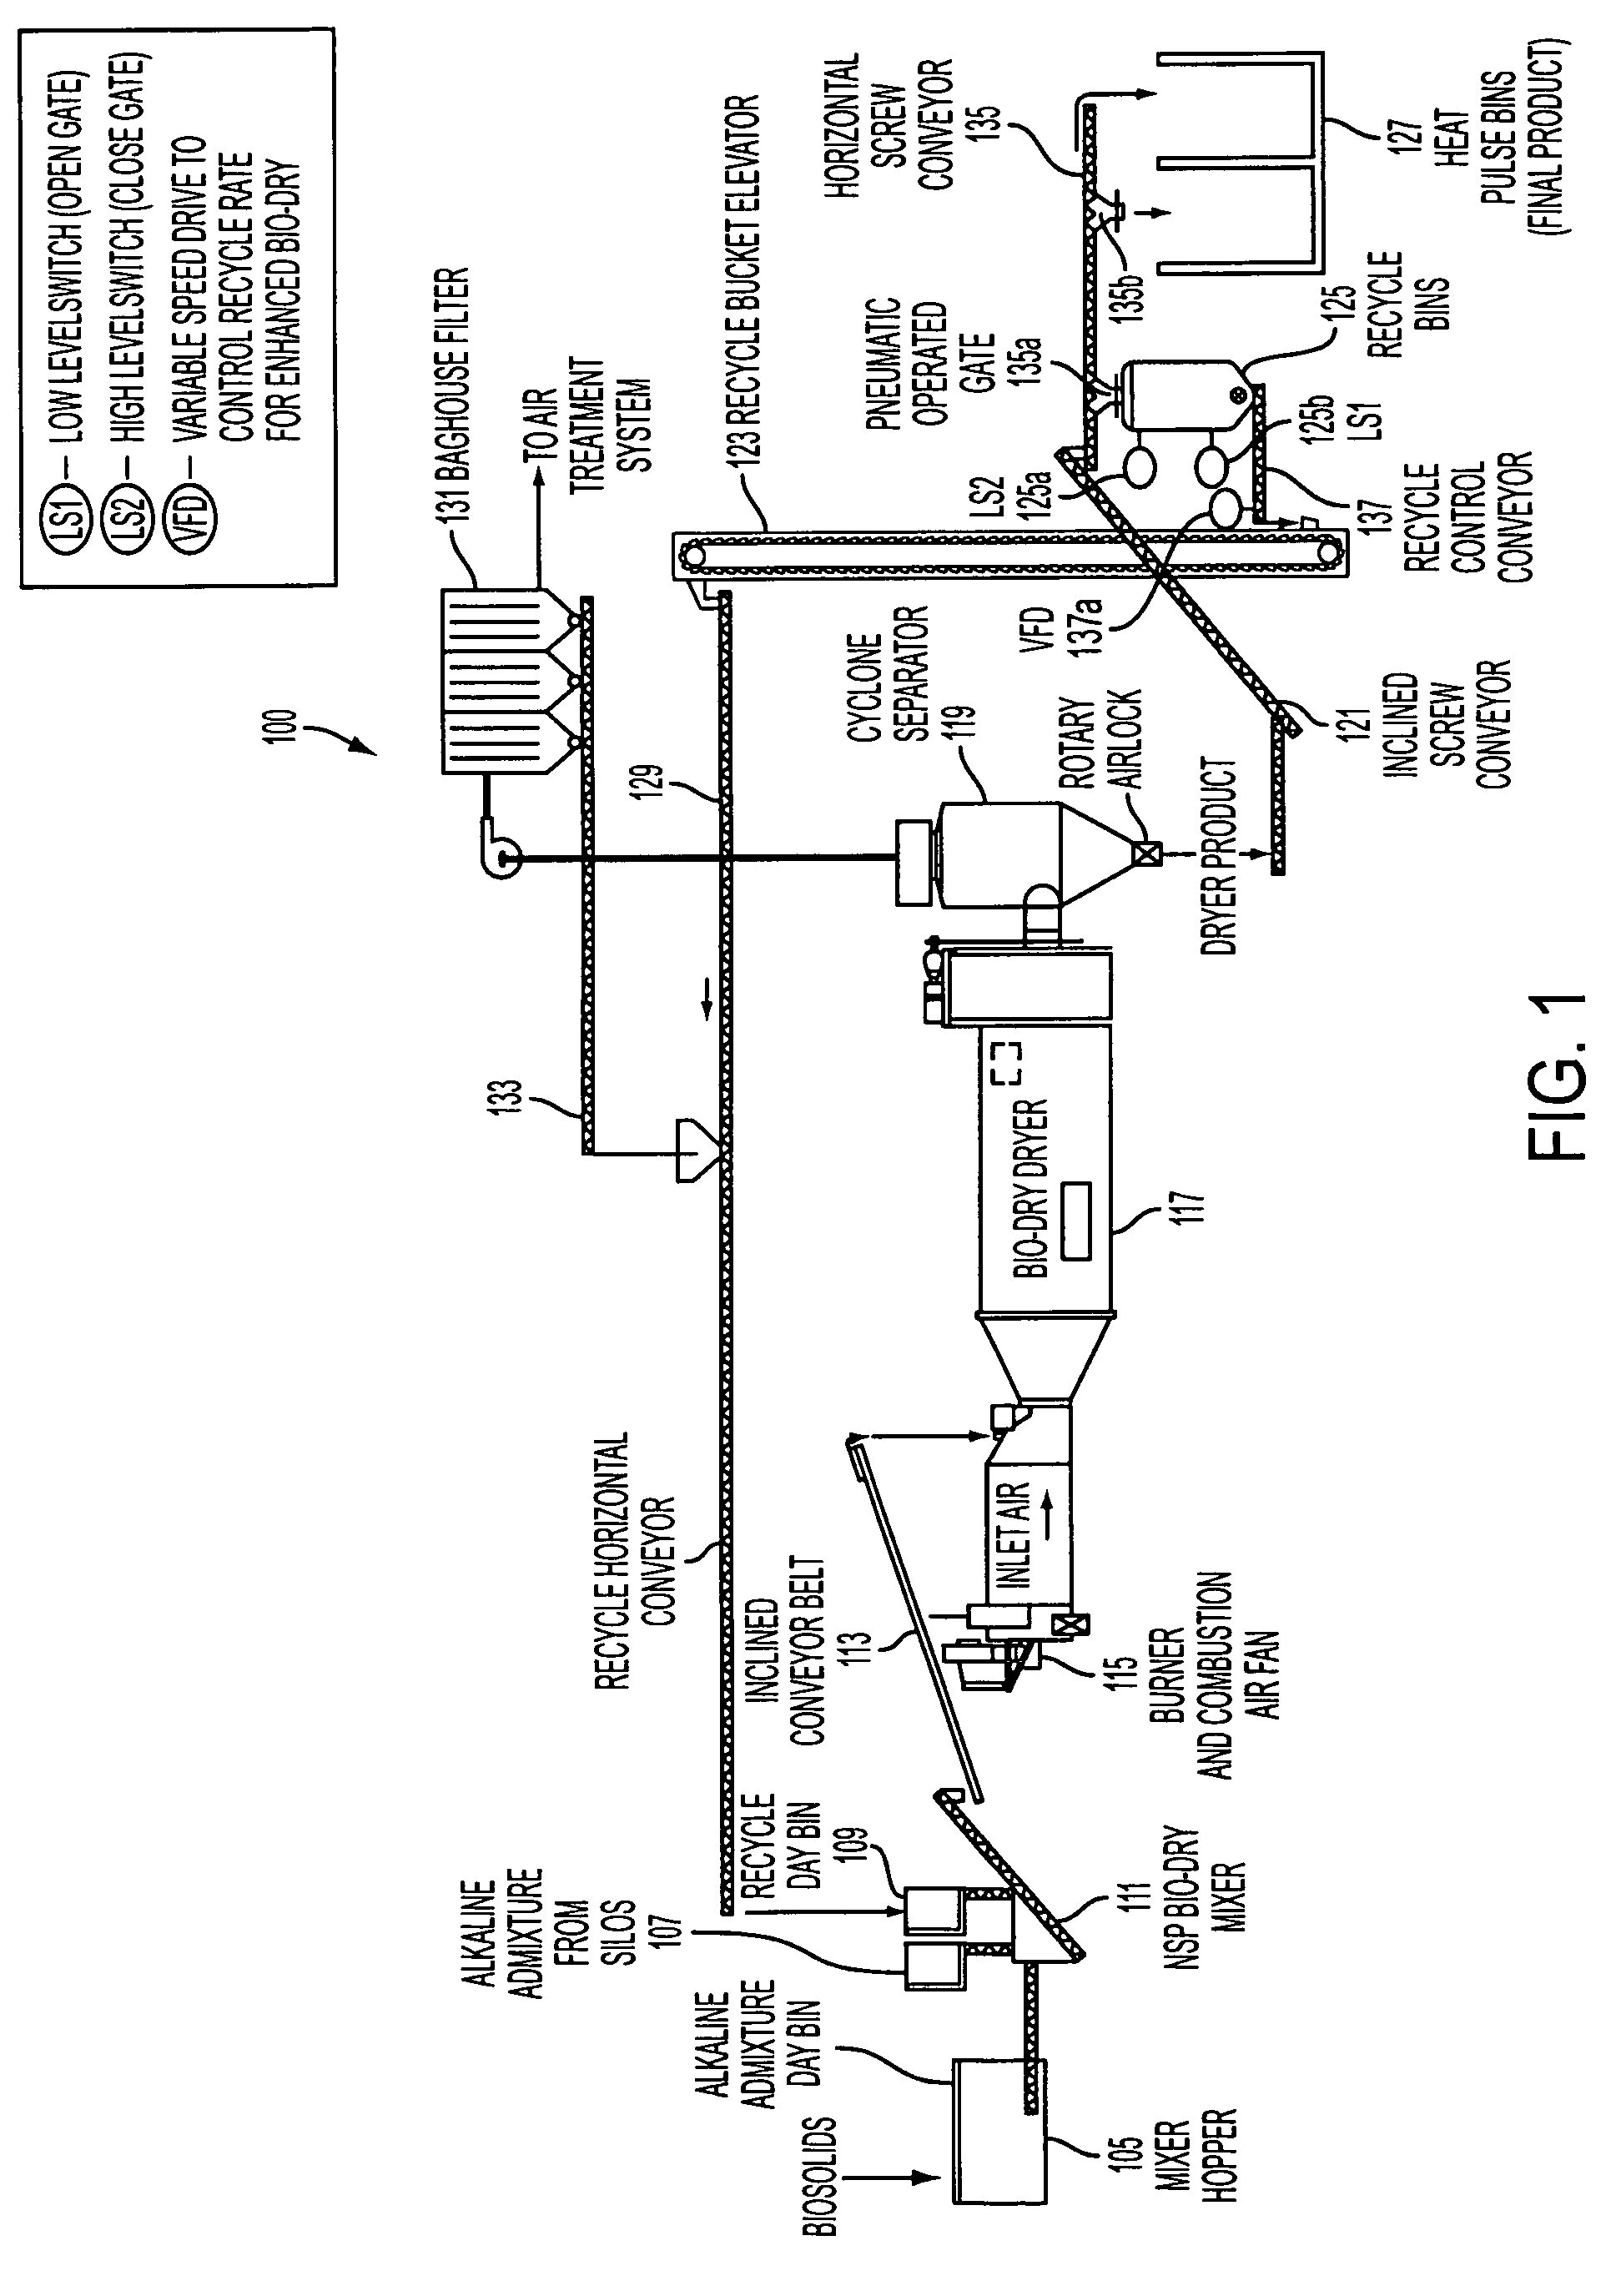 Method for treating sludge using recycle